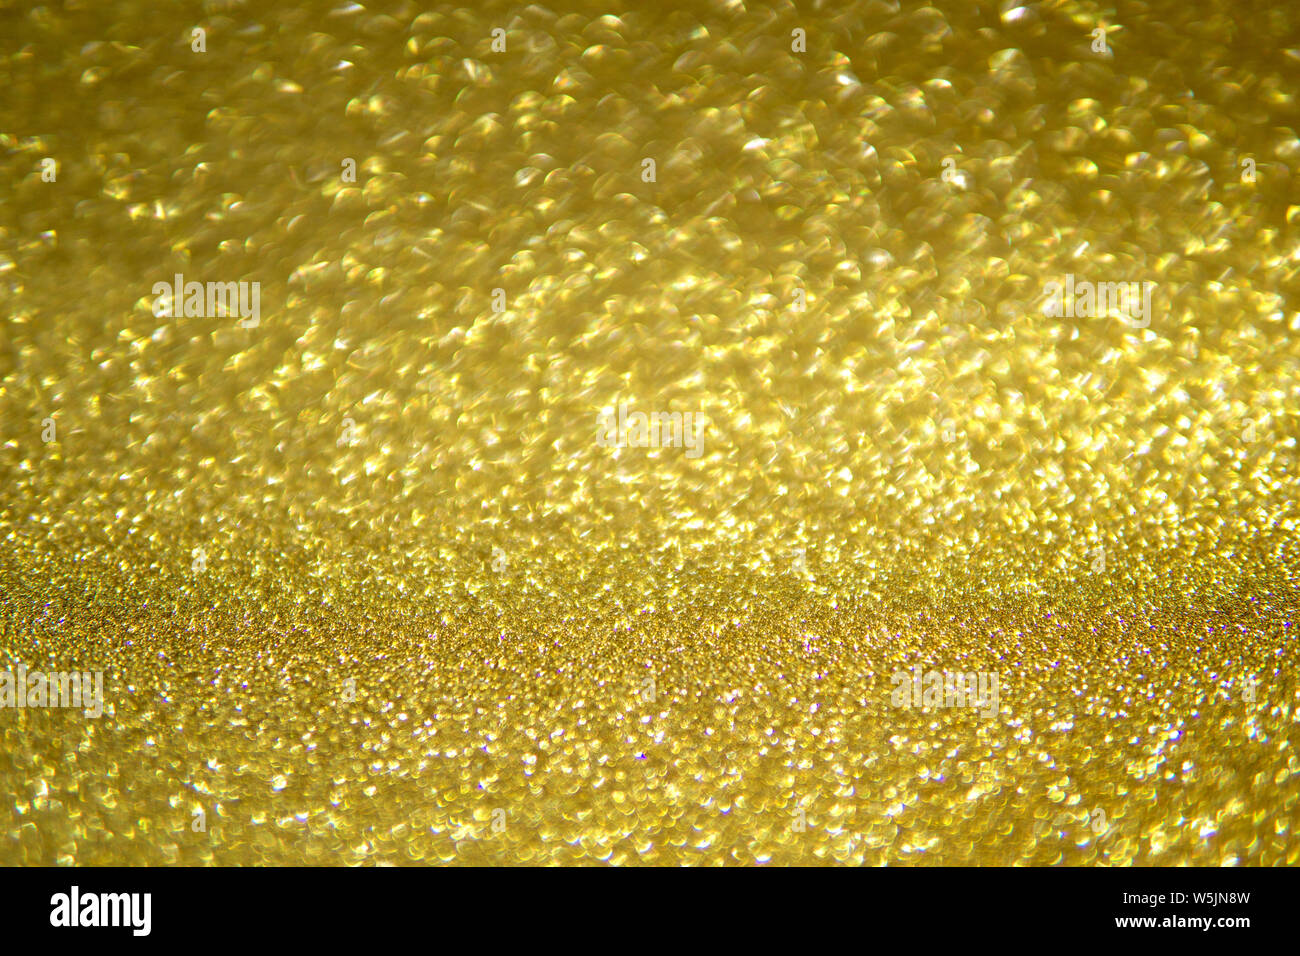 Abstract blurred background of golden glitter light partly in focus. Stock Photo